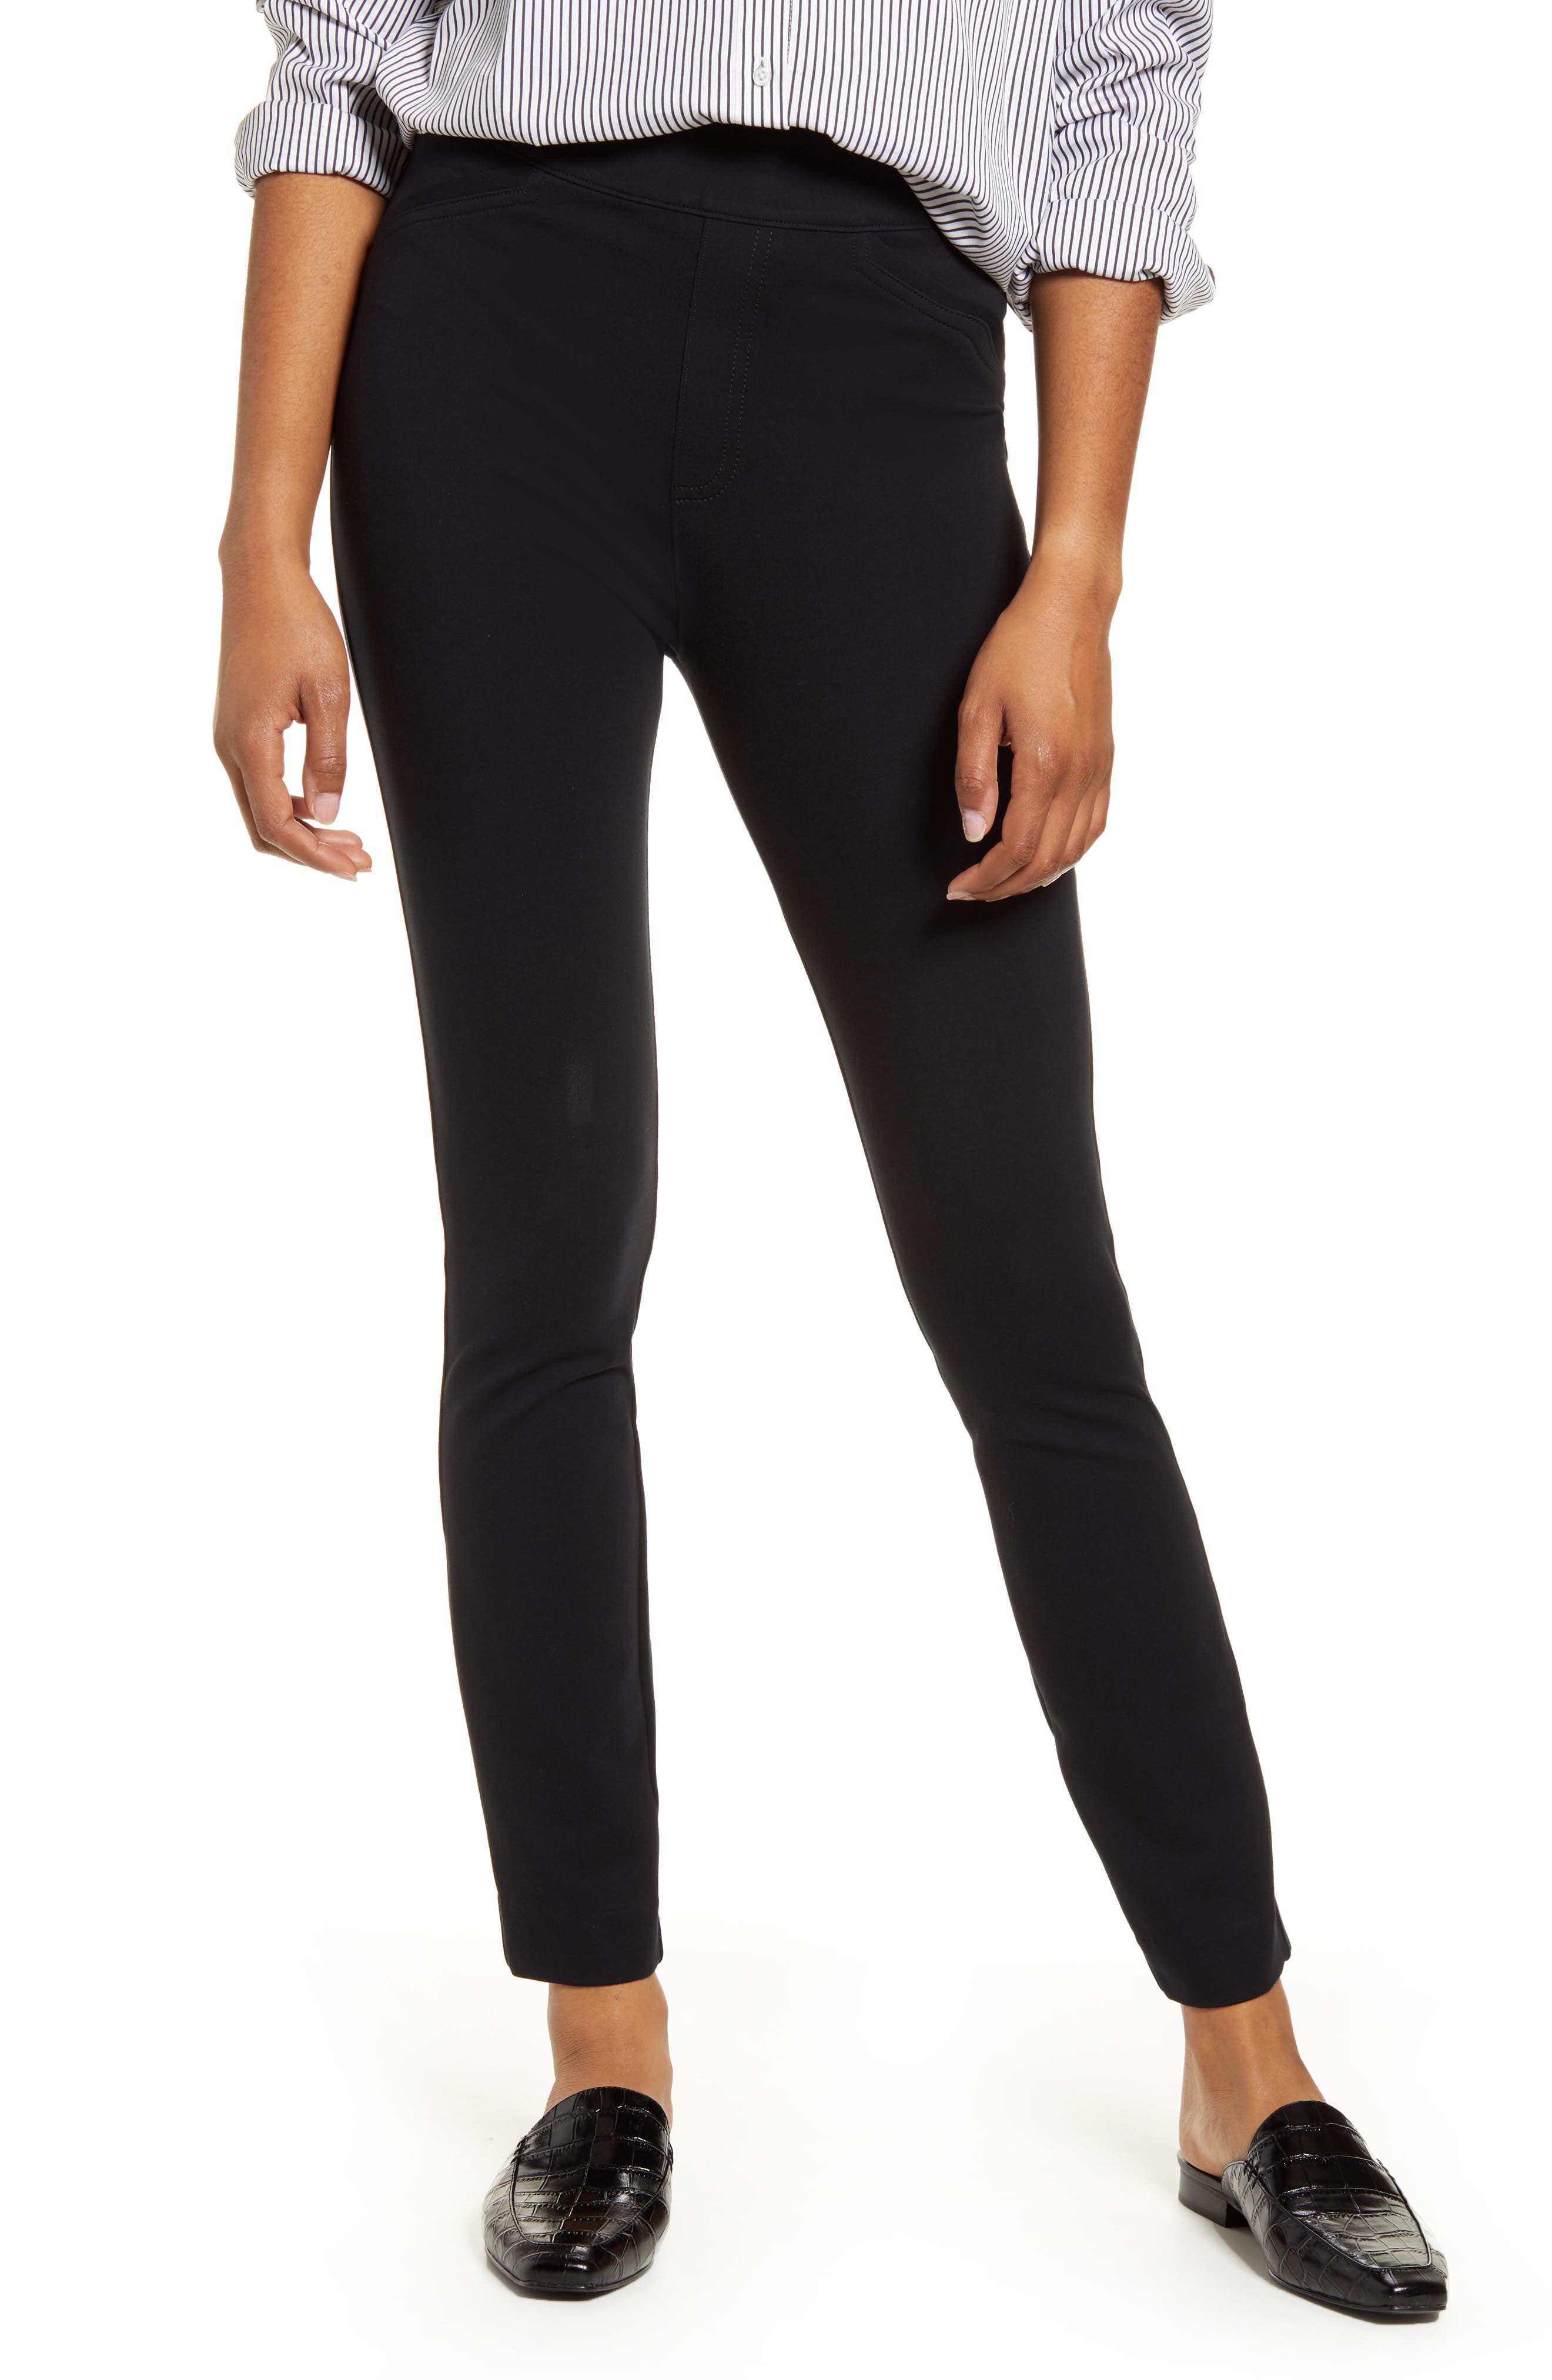 Spanx Quietly Launched an Early Memorial Day Sale, Including the Butt- Lifting Leggings Jennifer Garner Wears - Yahoo Sports